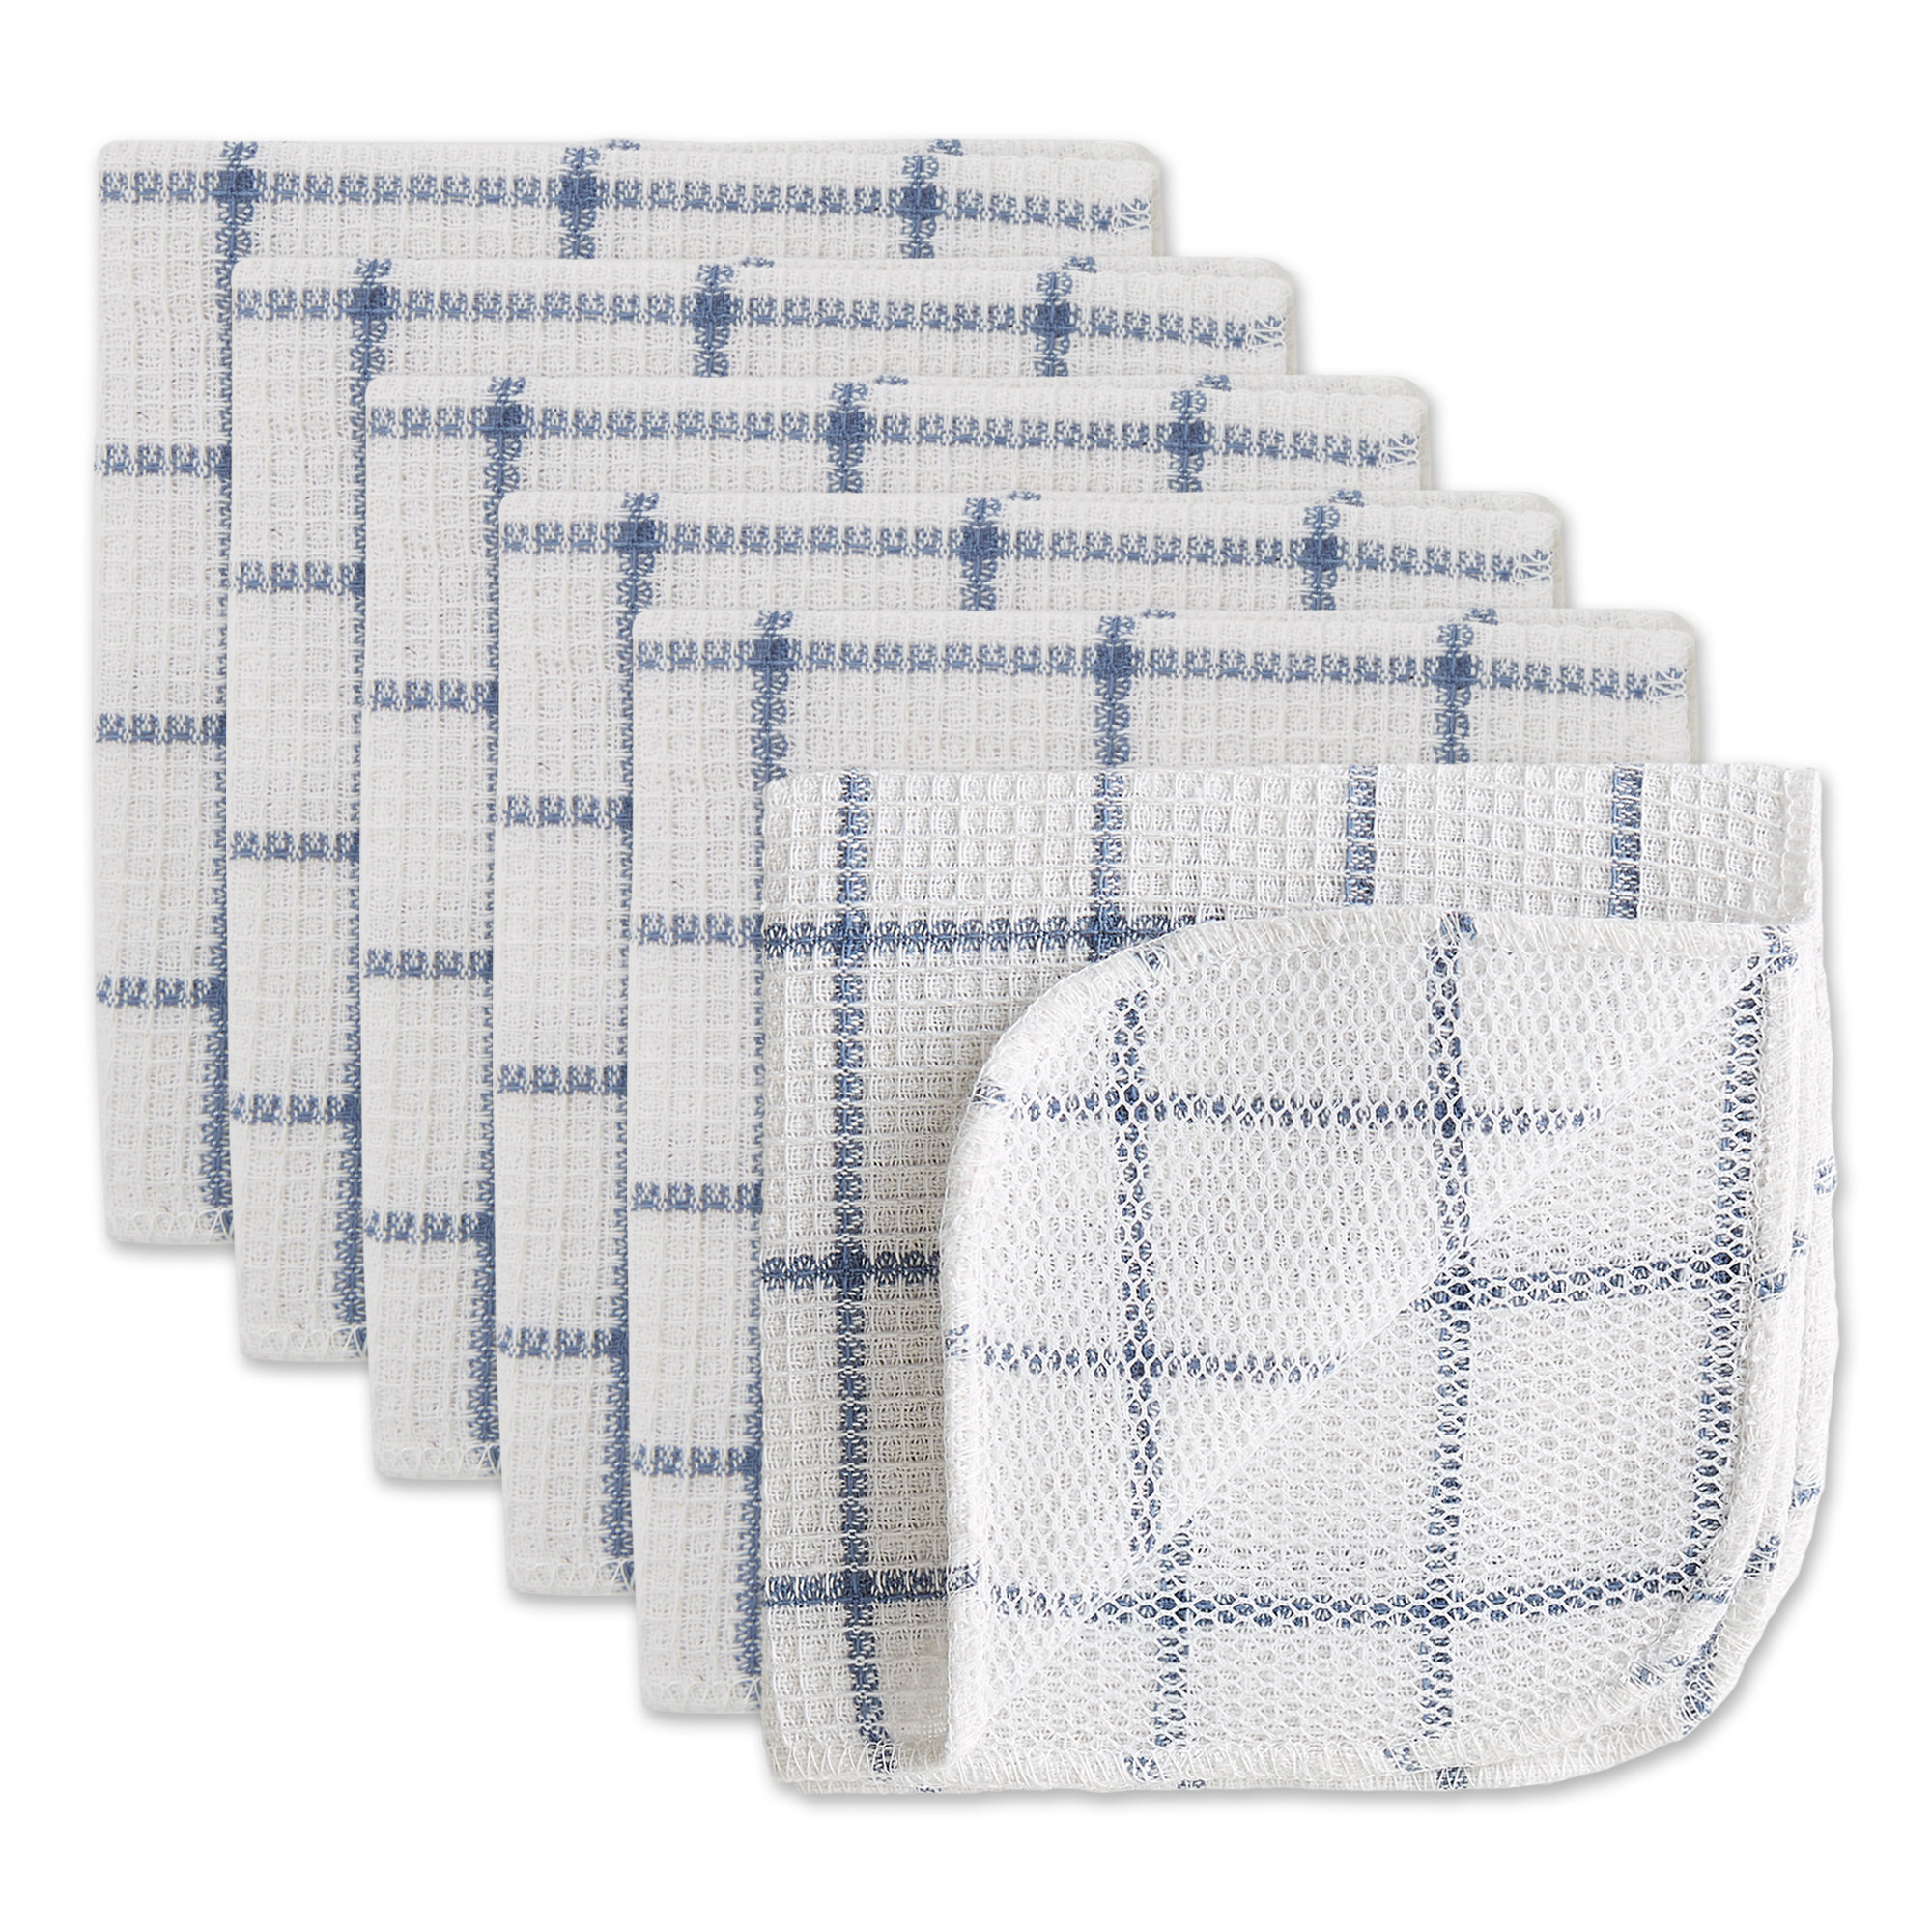 Set of 4 Blue Striped Scrubber Dish Cloths, Cotton Sold by at Home